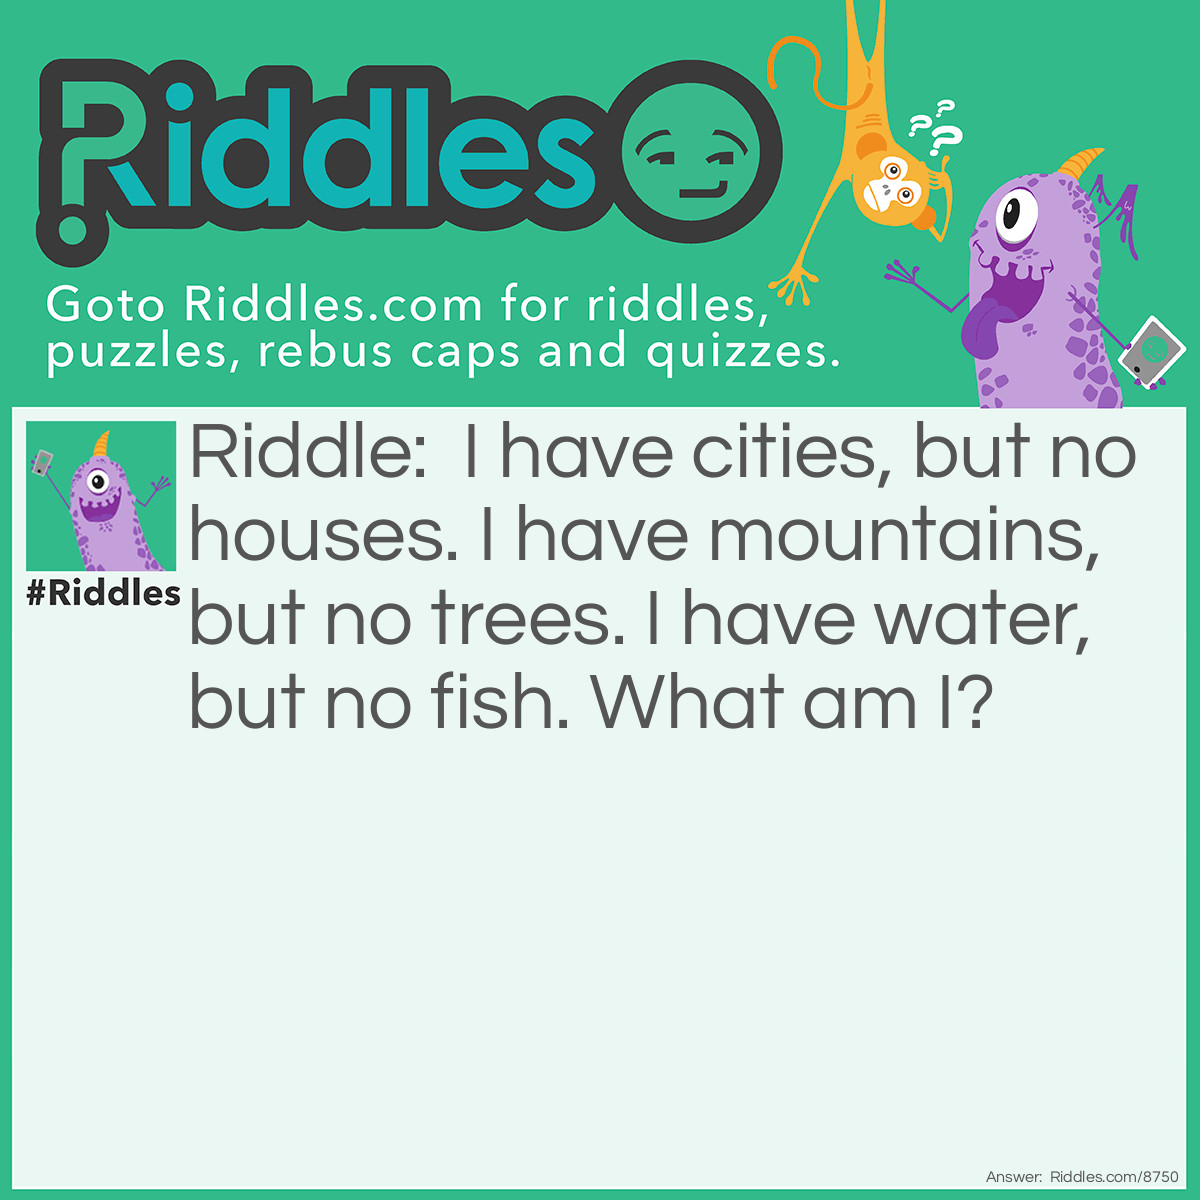 Riddle: I have cities, but no houses. I have mountains, but no trees. I have water, but no fish. What am I? Answer: A map